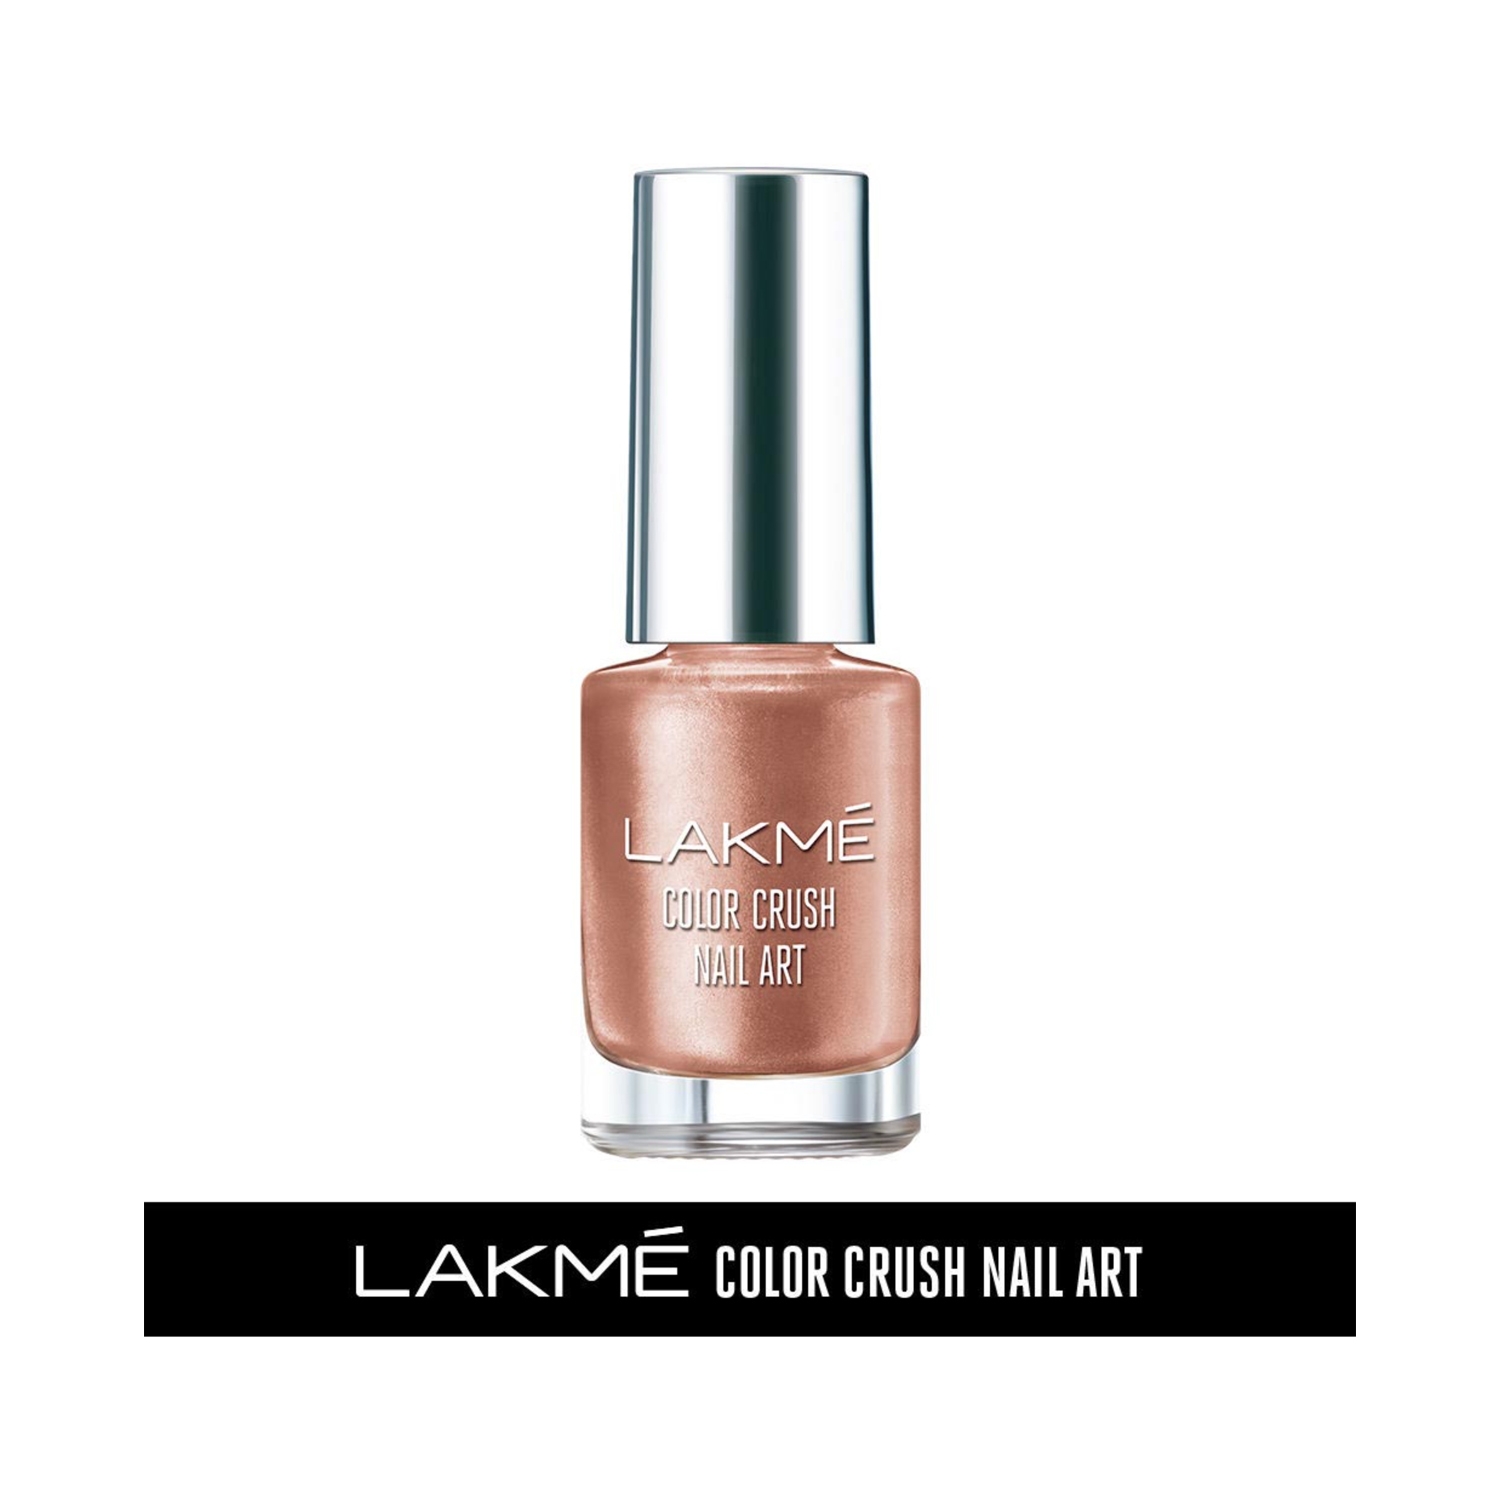 Lakmé Nail Color Remover, 27ml & Lakme 9 to 5 CC Cream Mini, 01 - Beige,  Light Face Makeup with Natural Coverage, SPF 30, 9 g : Amazon.in: Beauty